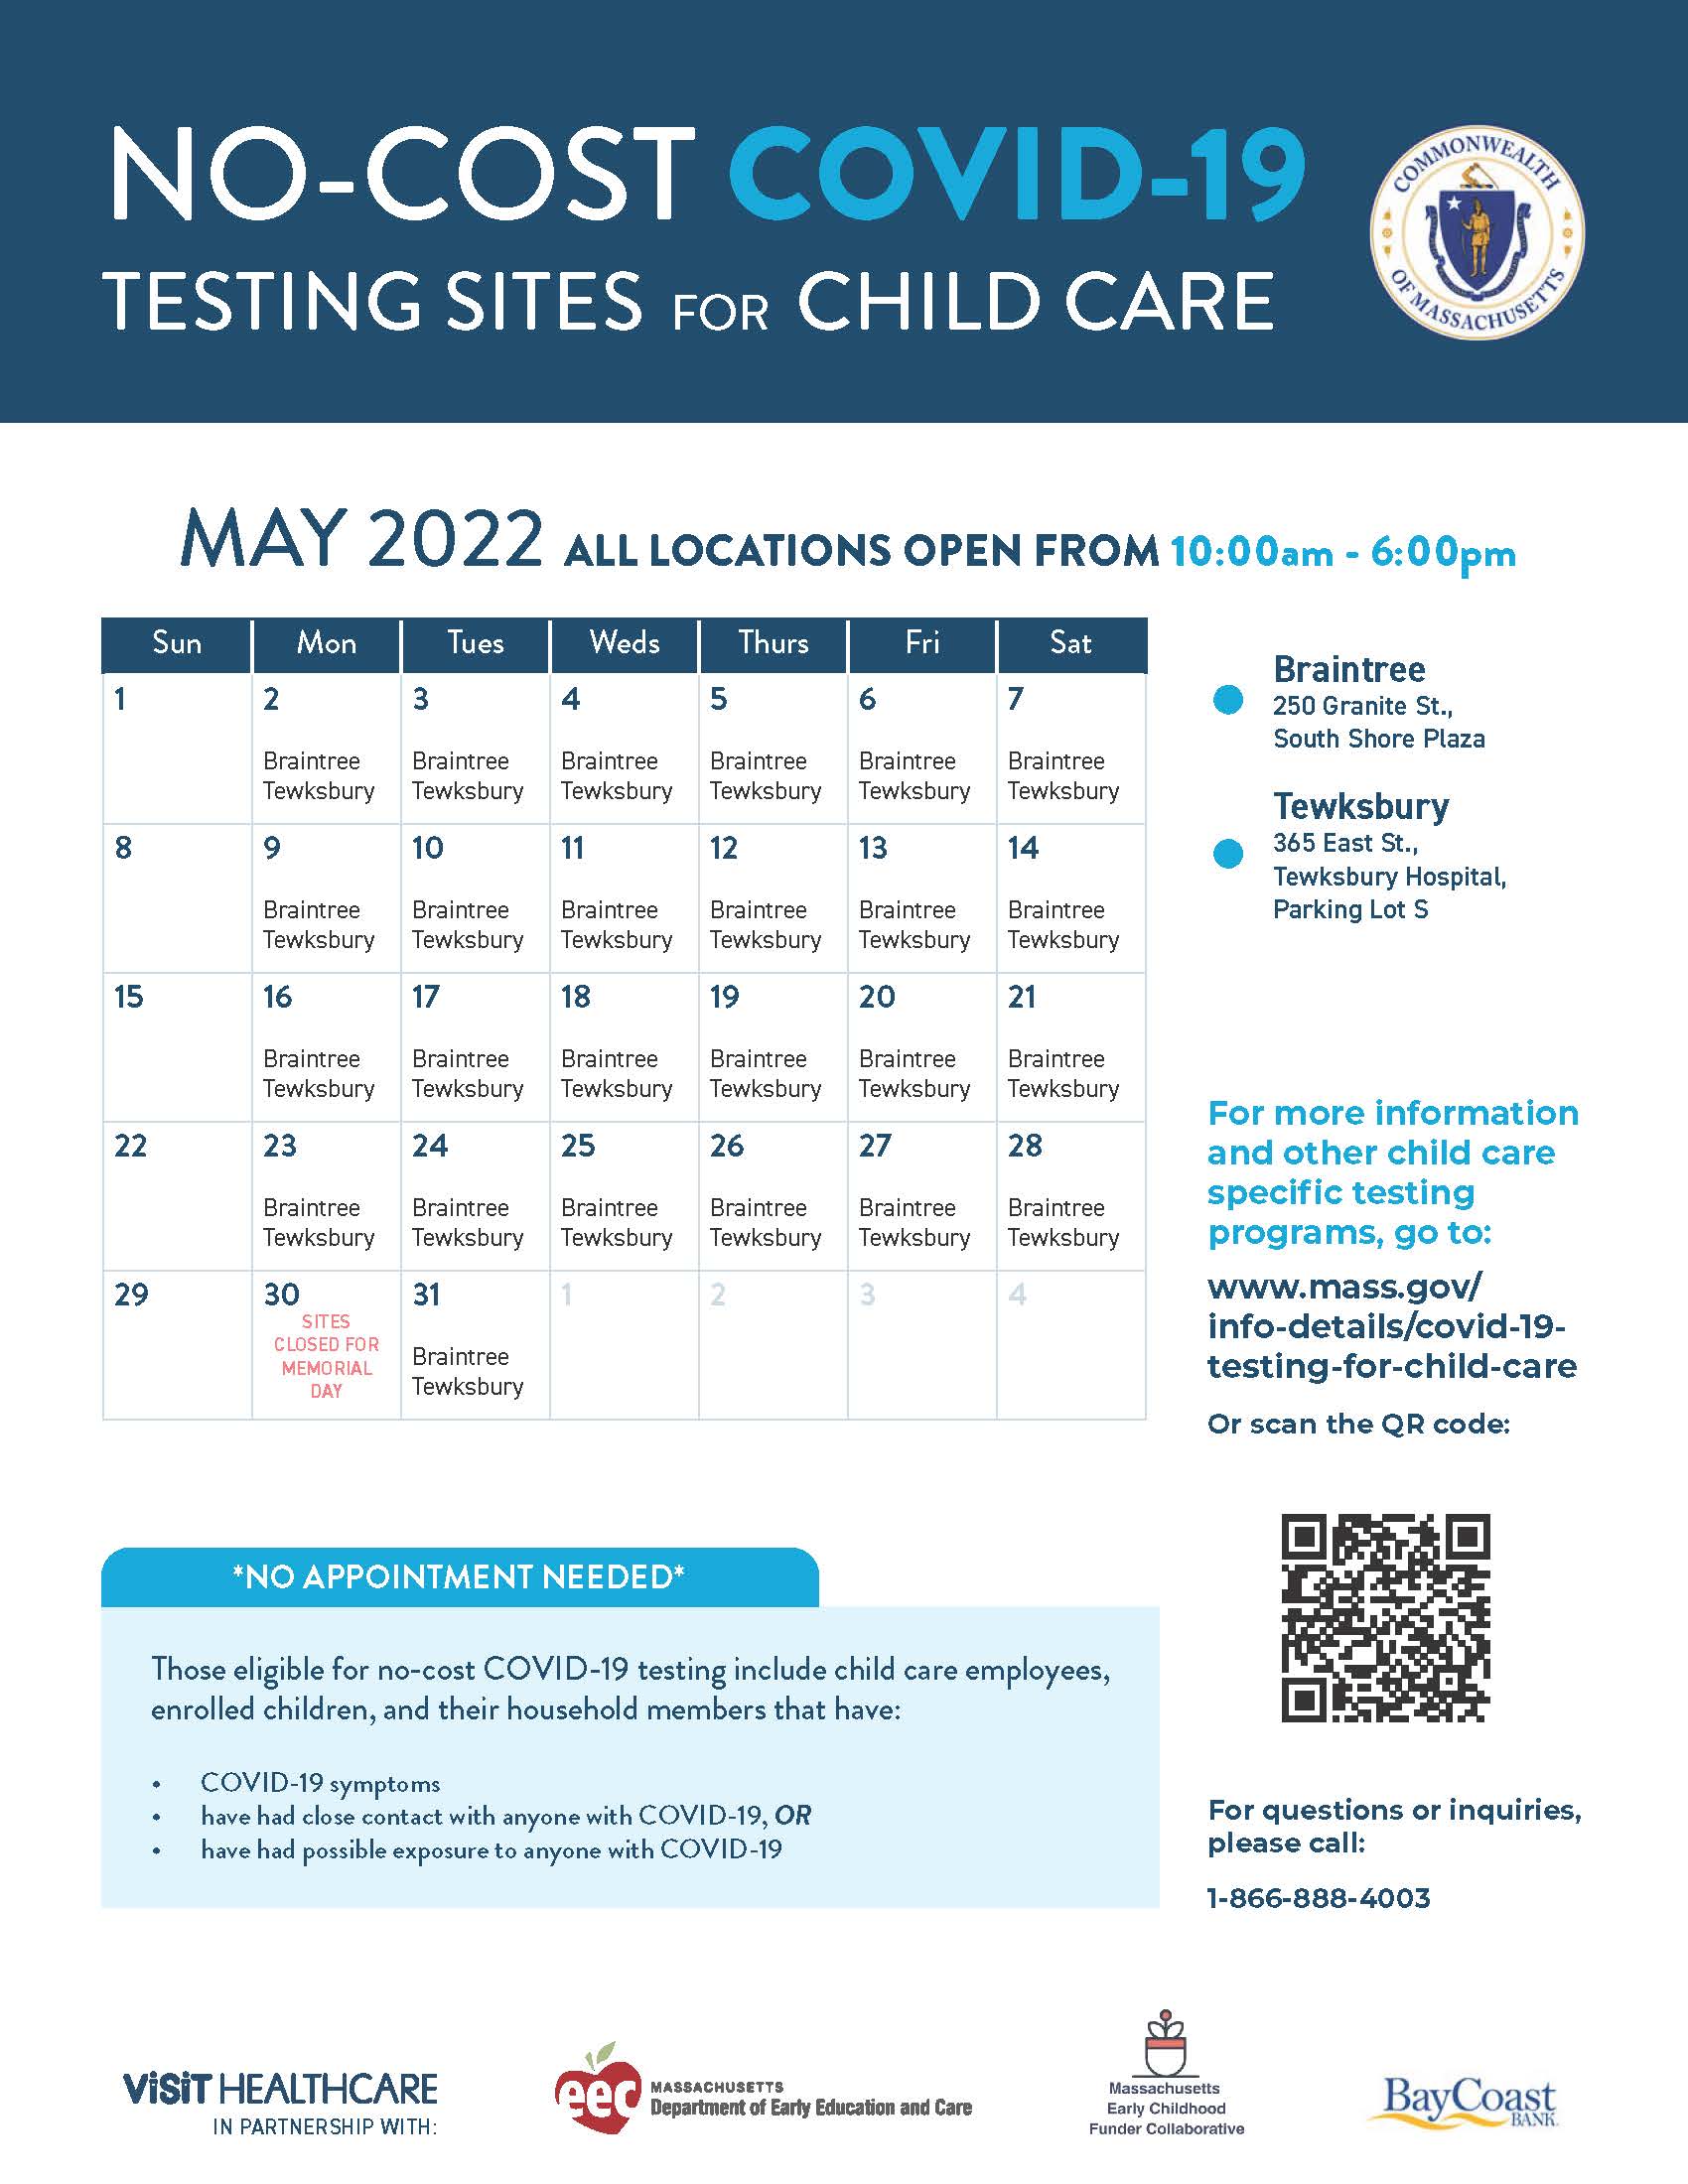 Schedule with Massachusetts Covid-19 testing locations